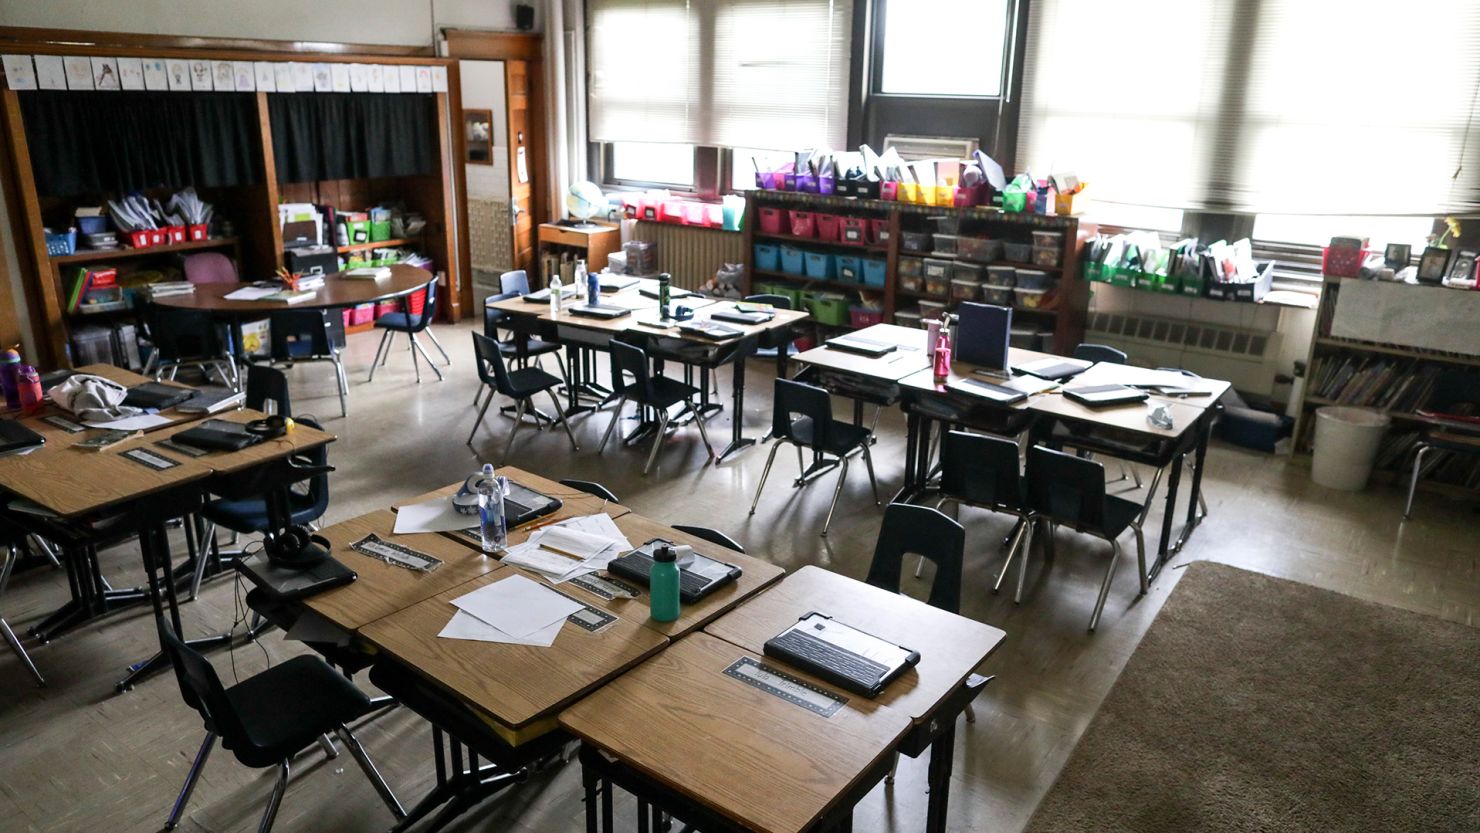 A classroom sits empty as students take a break for lunch on May 24, 2022, at an elementary school in Iowa.